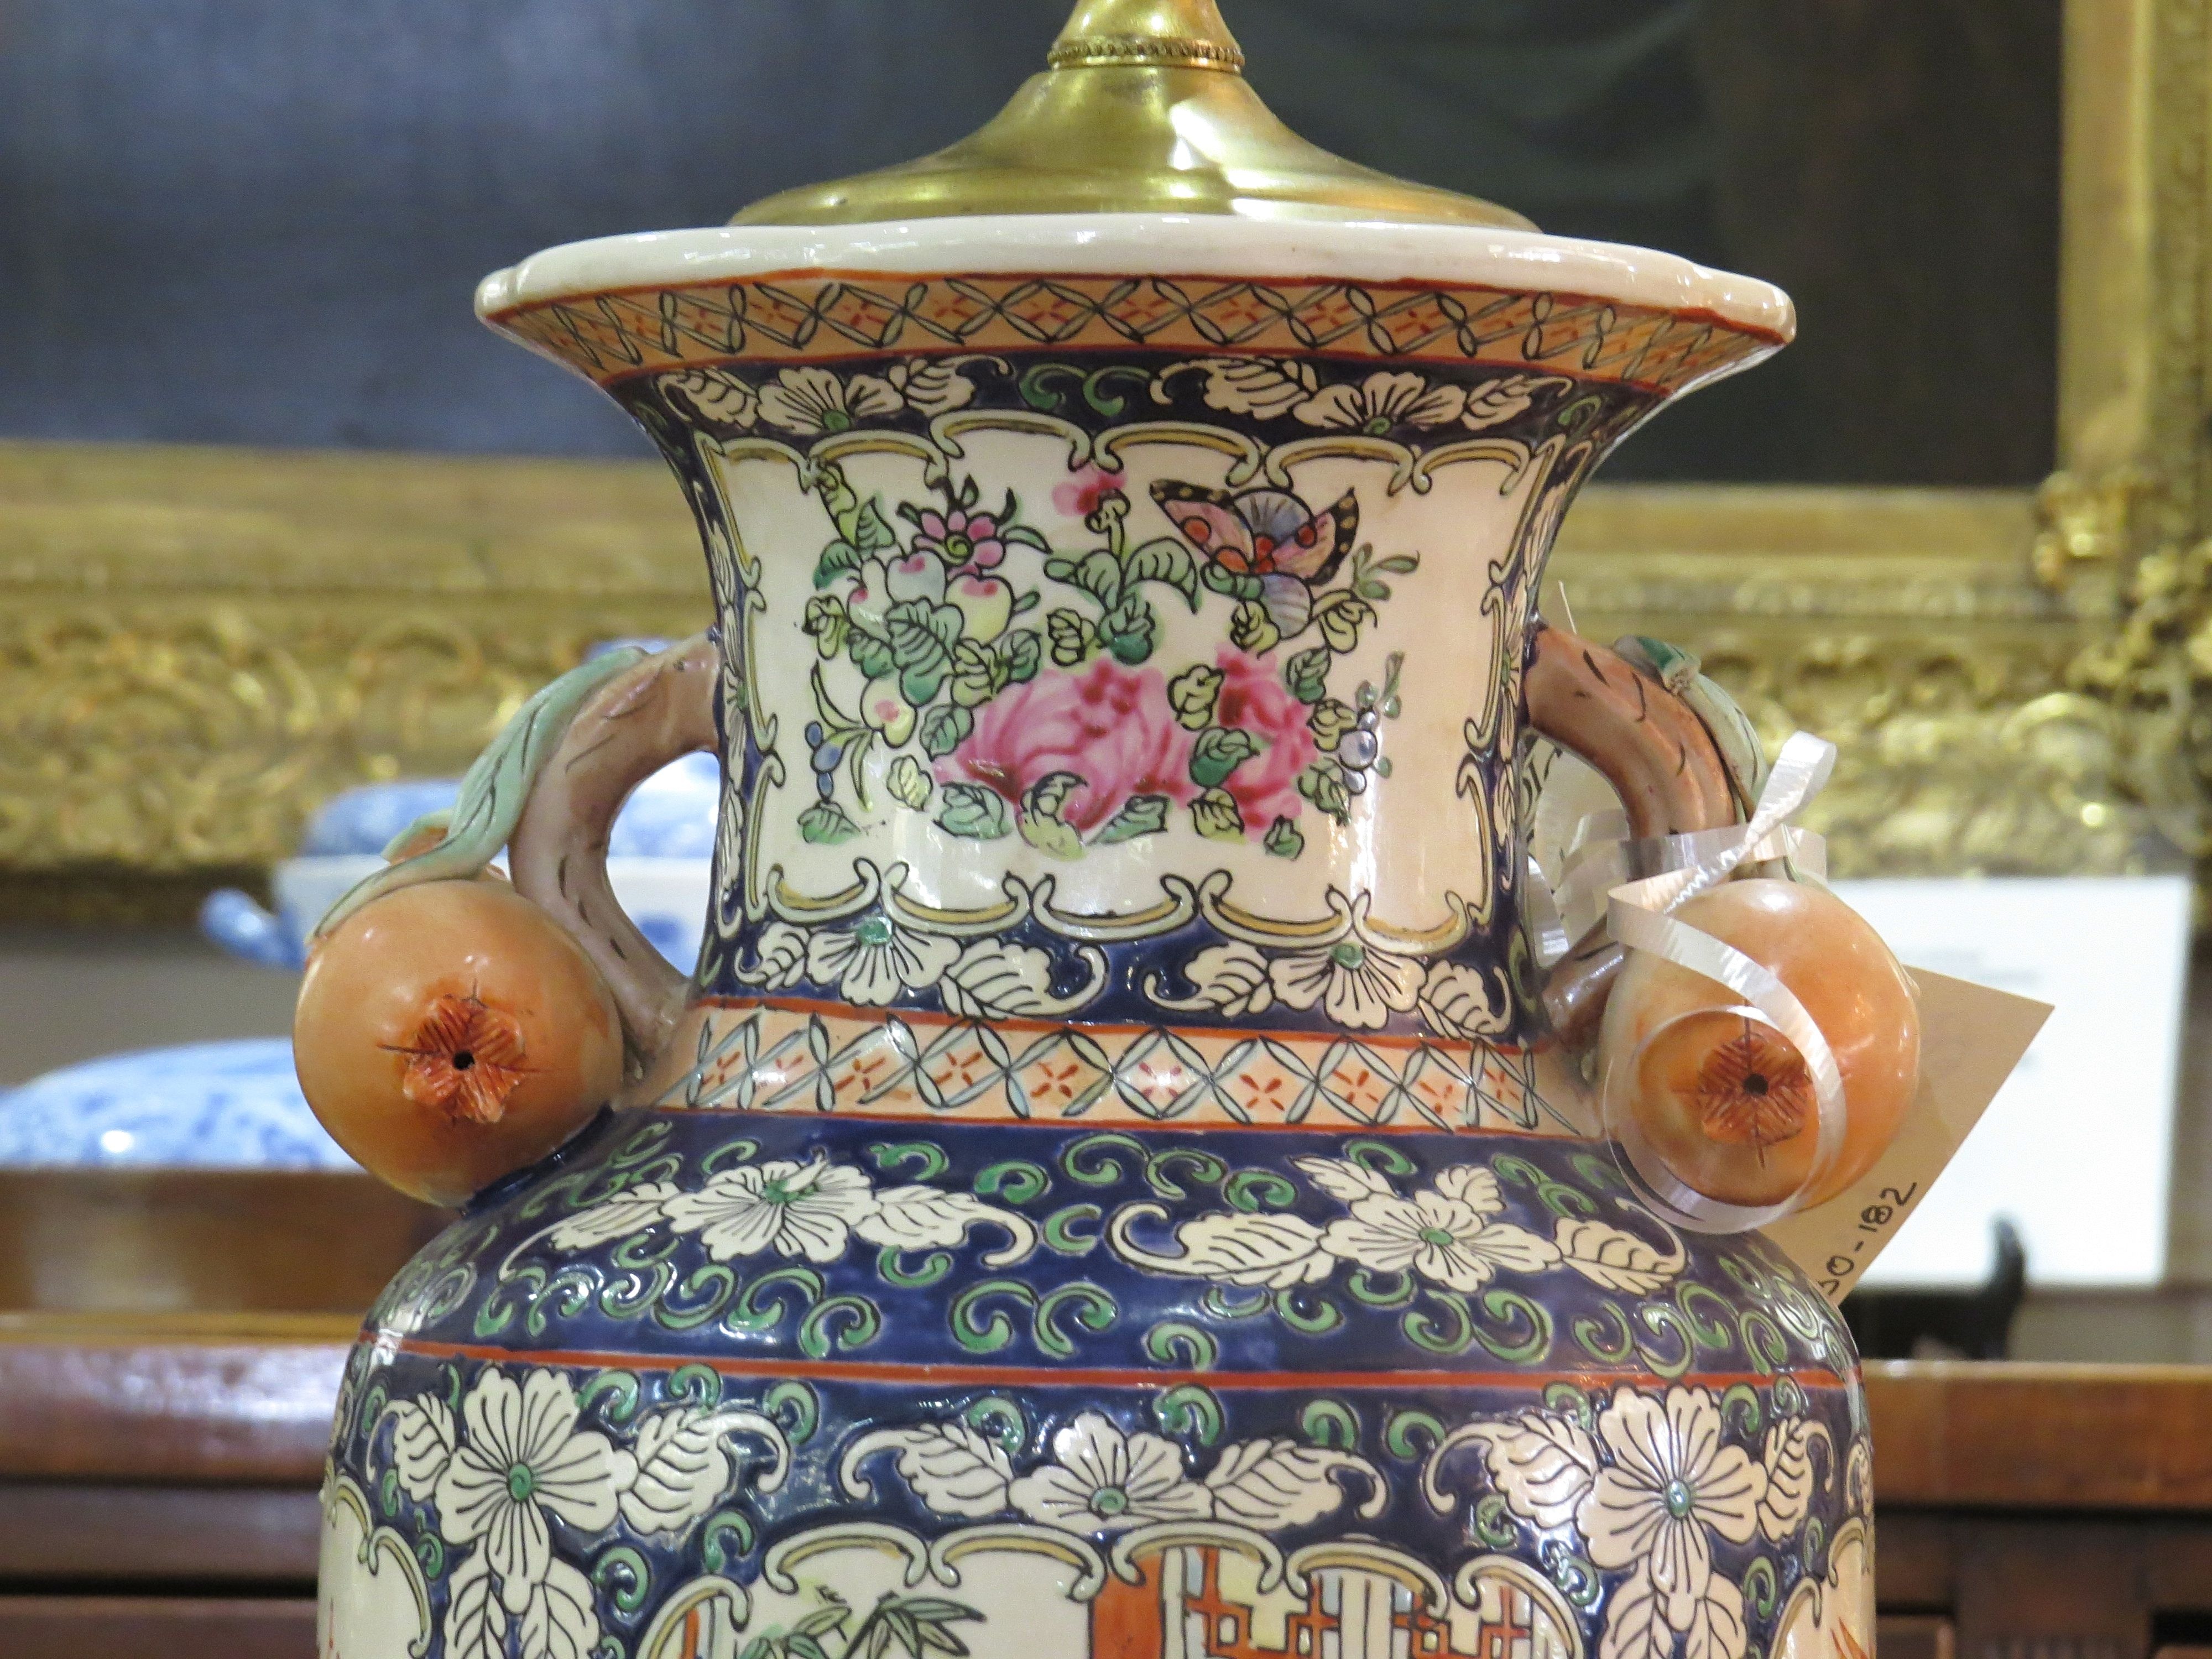 Chinese Porcelain Vase Lamp with Pomegranate Handles  SOLD